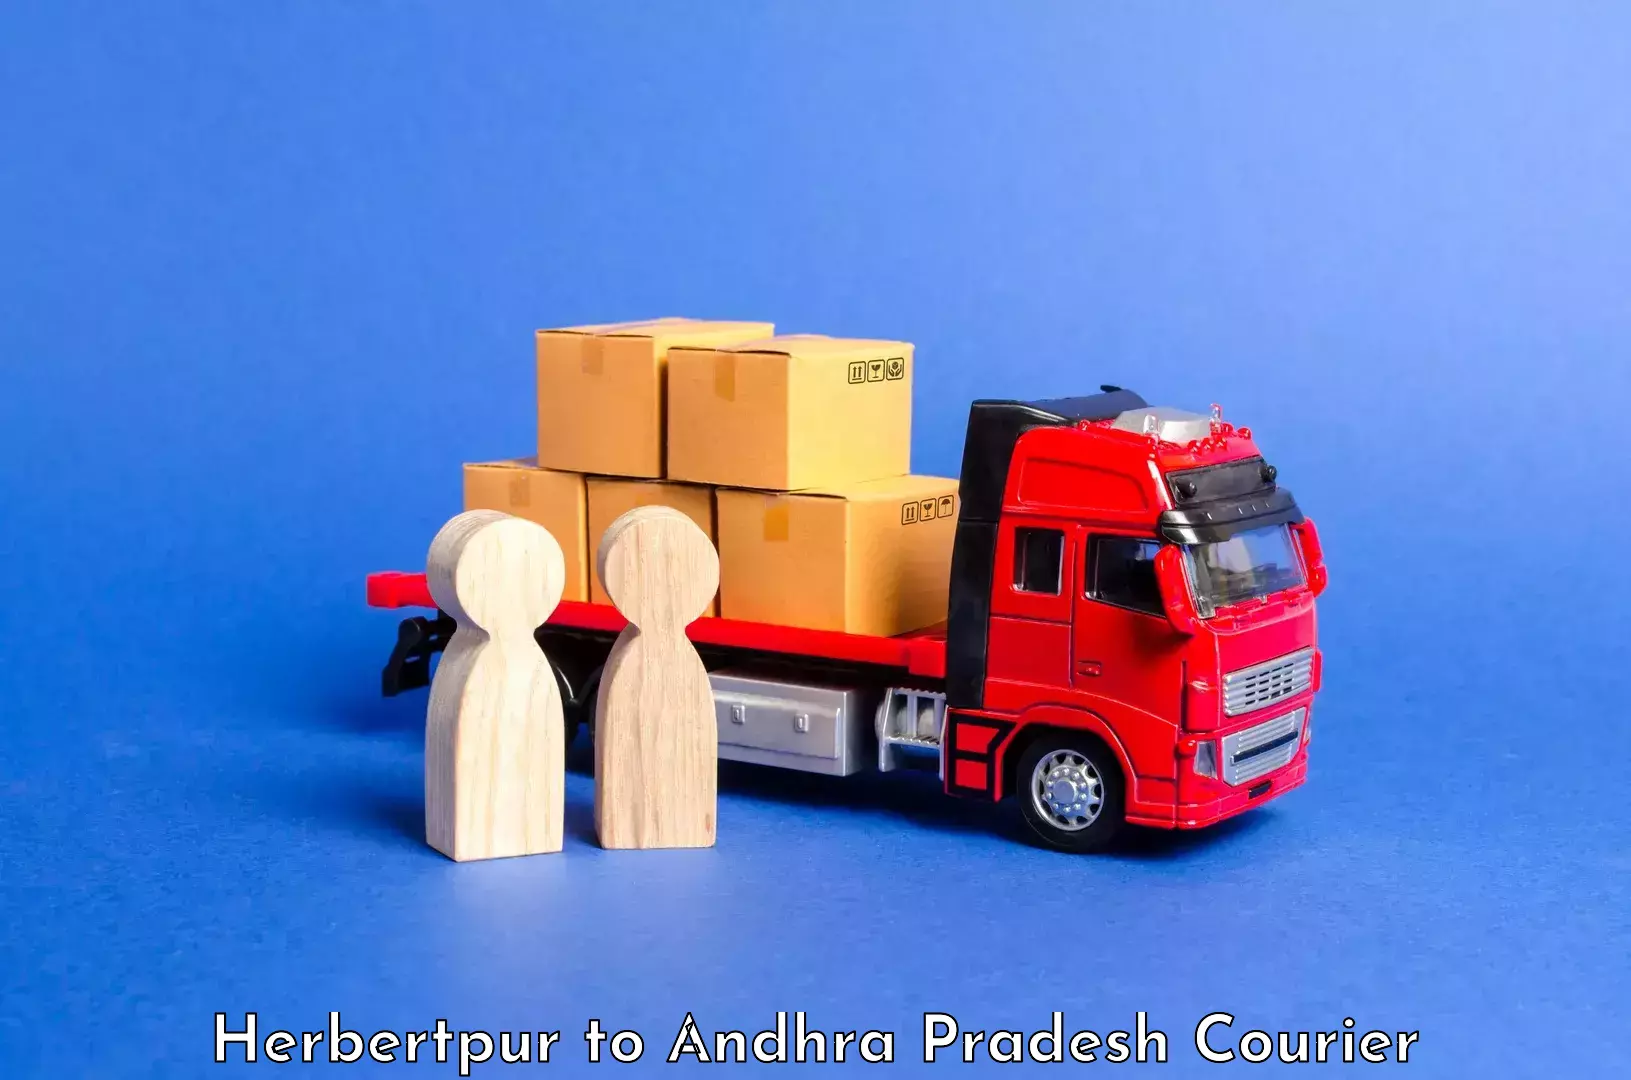 Efficient luggage delivery in Herbertpur to Amalapuram